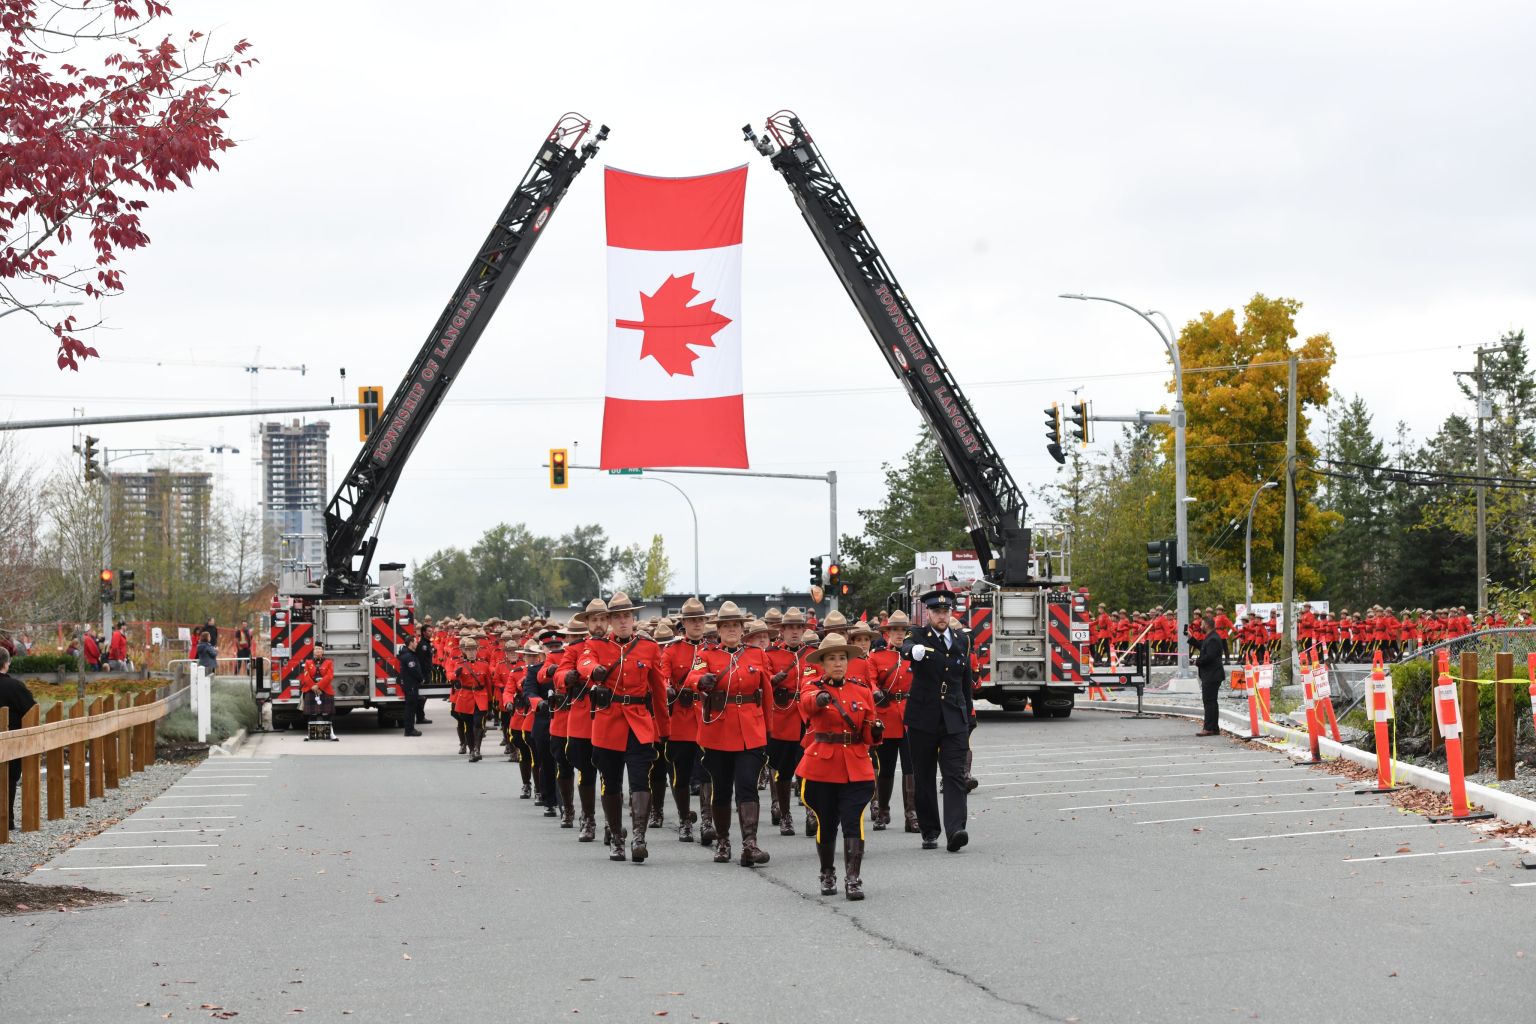 Cst. Frederick “Rick” O’Brien honoured with a celebration of life at RCMP regimental funeral